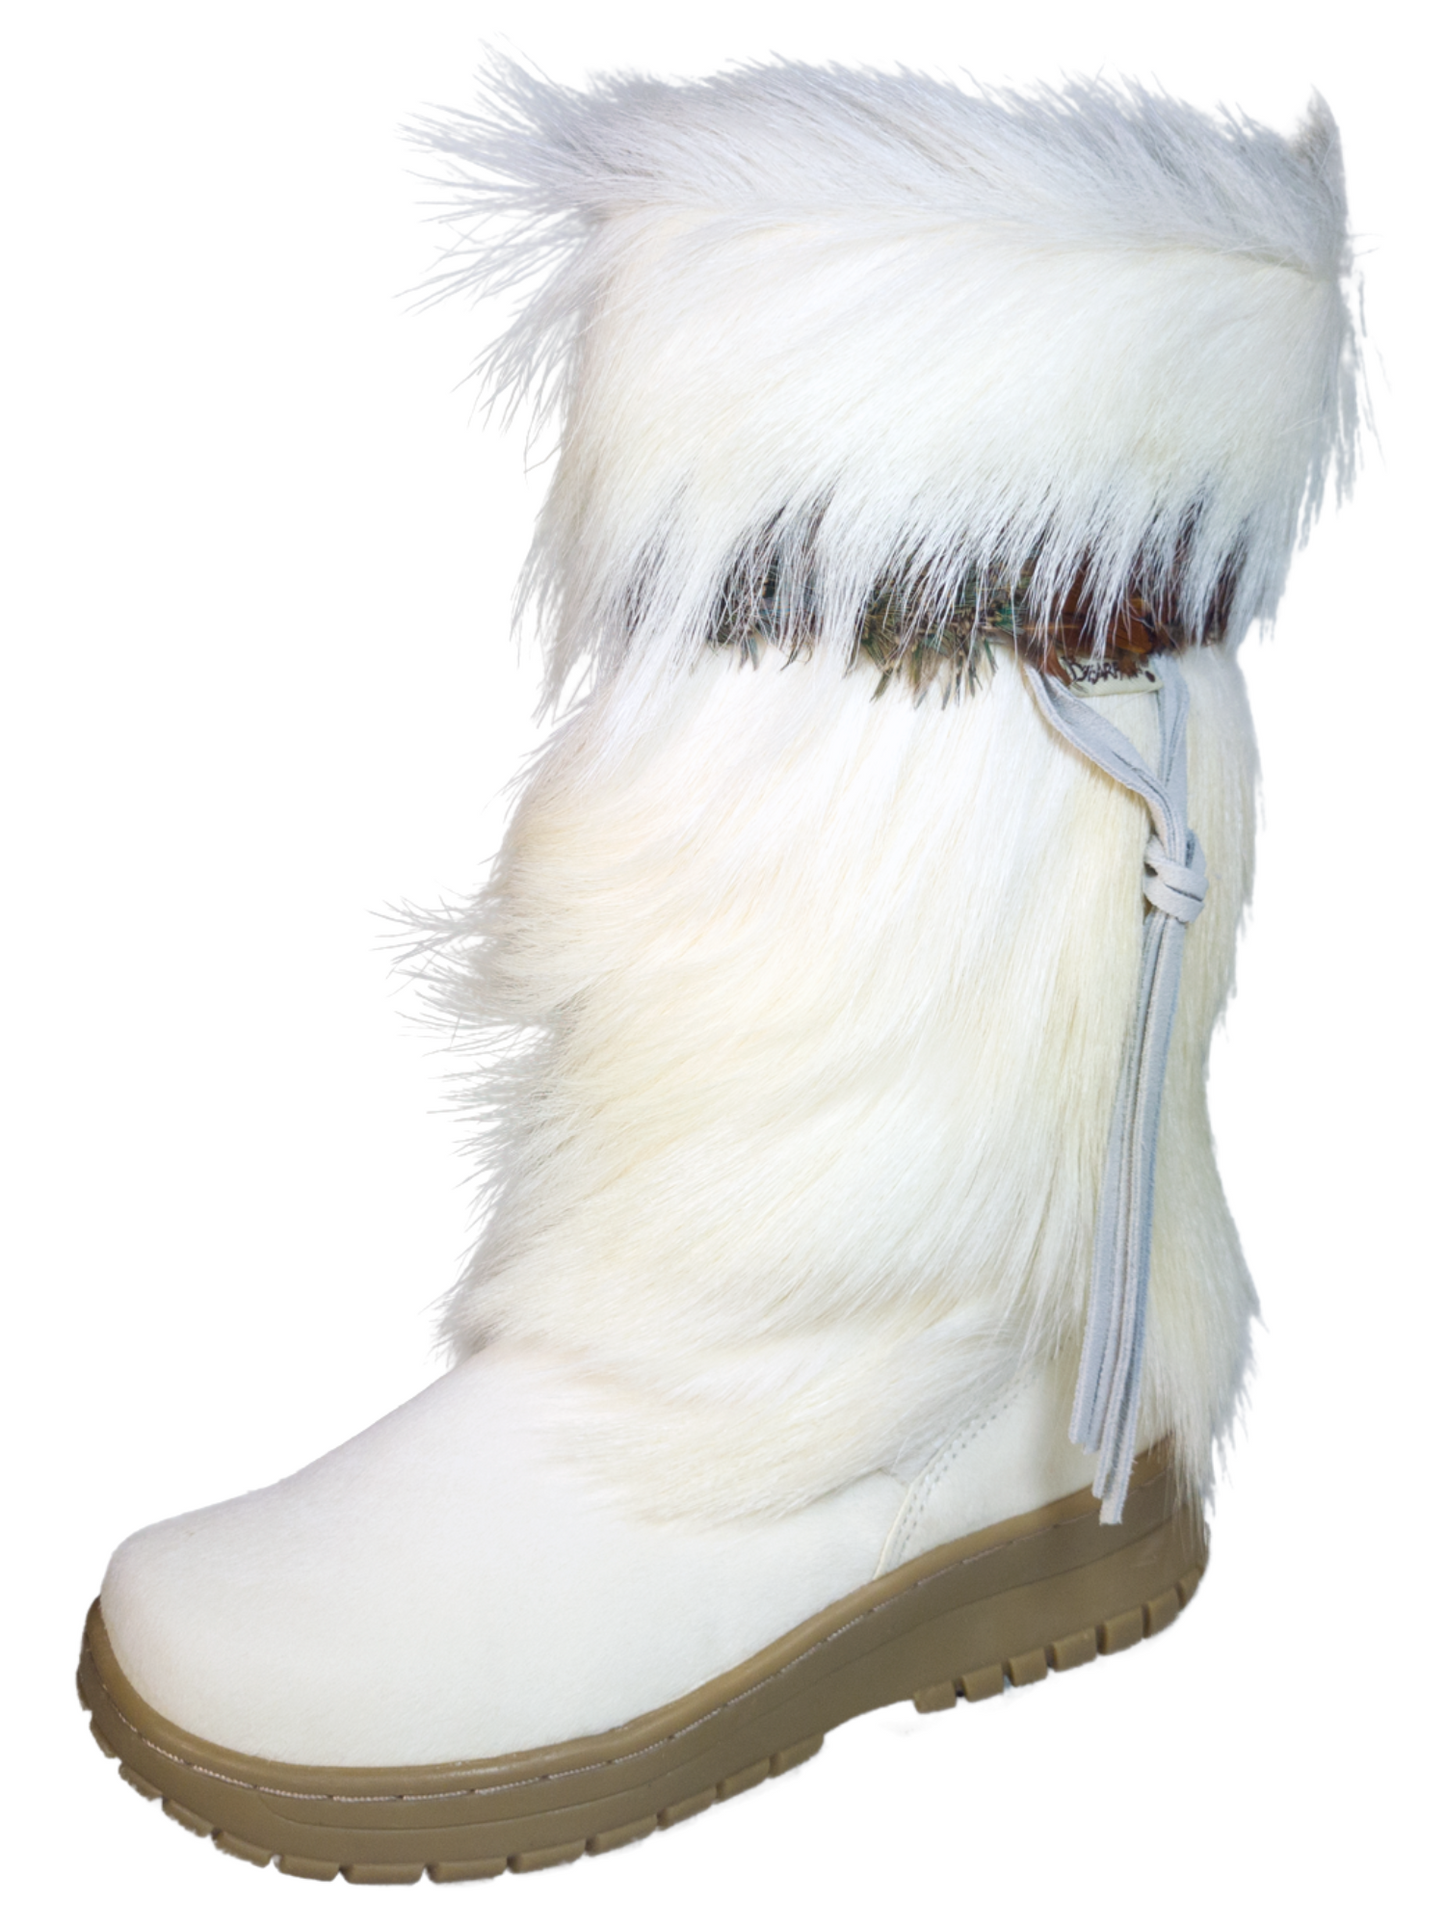 Genuine Leather Winter Snow Boots with Fur/Goat Hair for Women 'Bearpaw' - ID: 7108 Winter Boots Bearpaw White